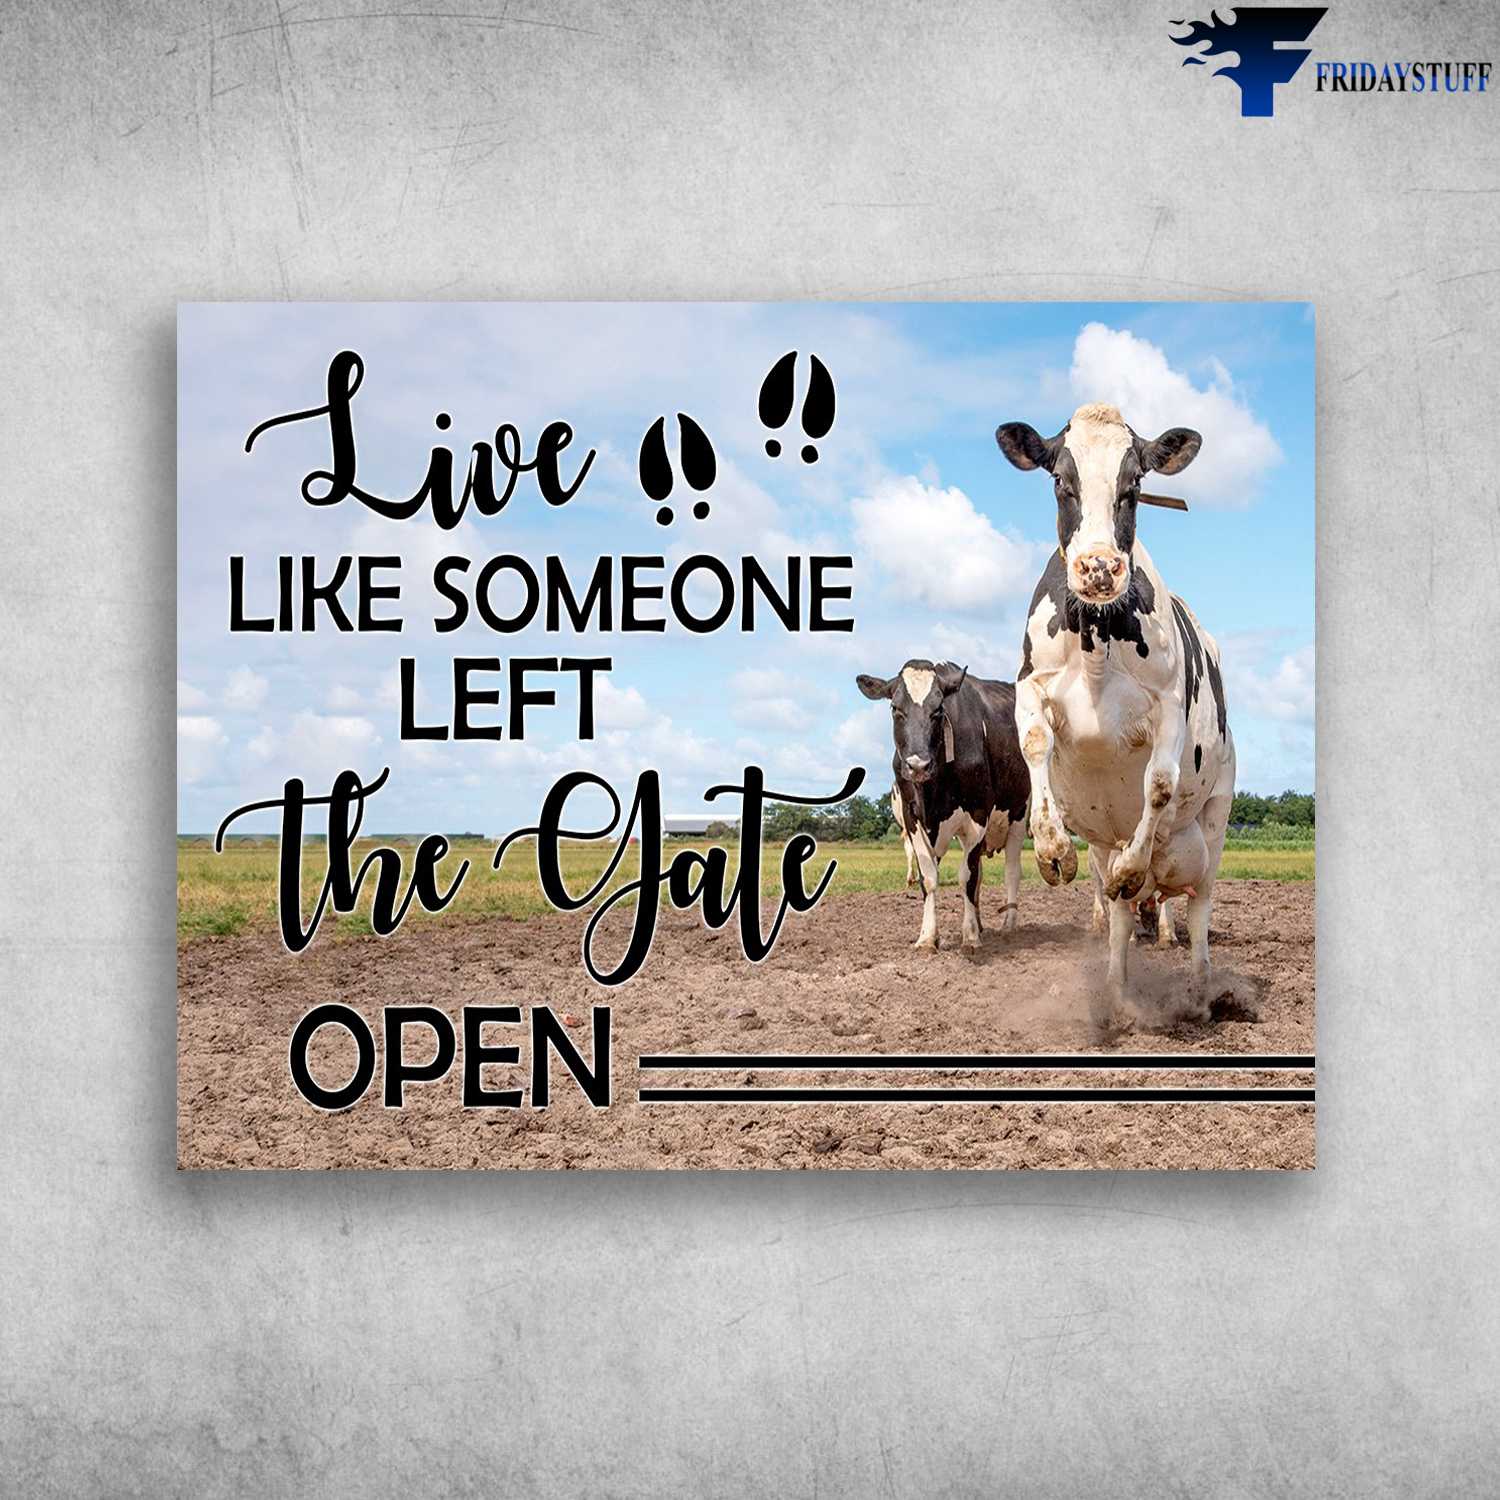 Dairy Cow Poster, Cow Farm, Live Like Someone Left The Gate Open